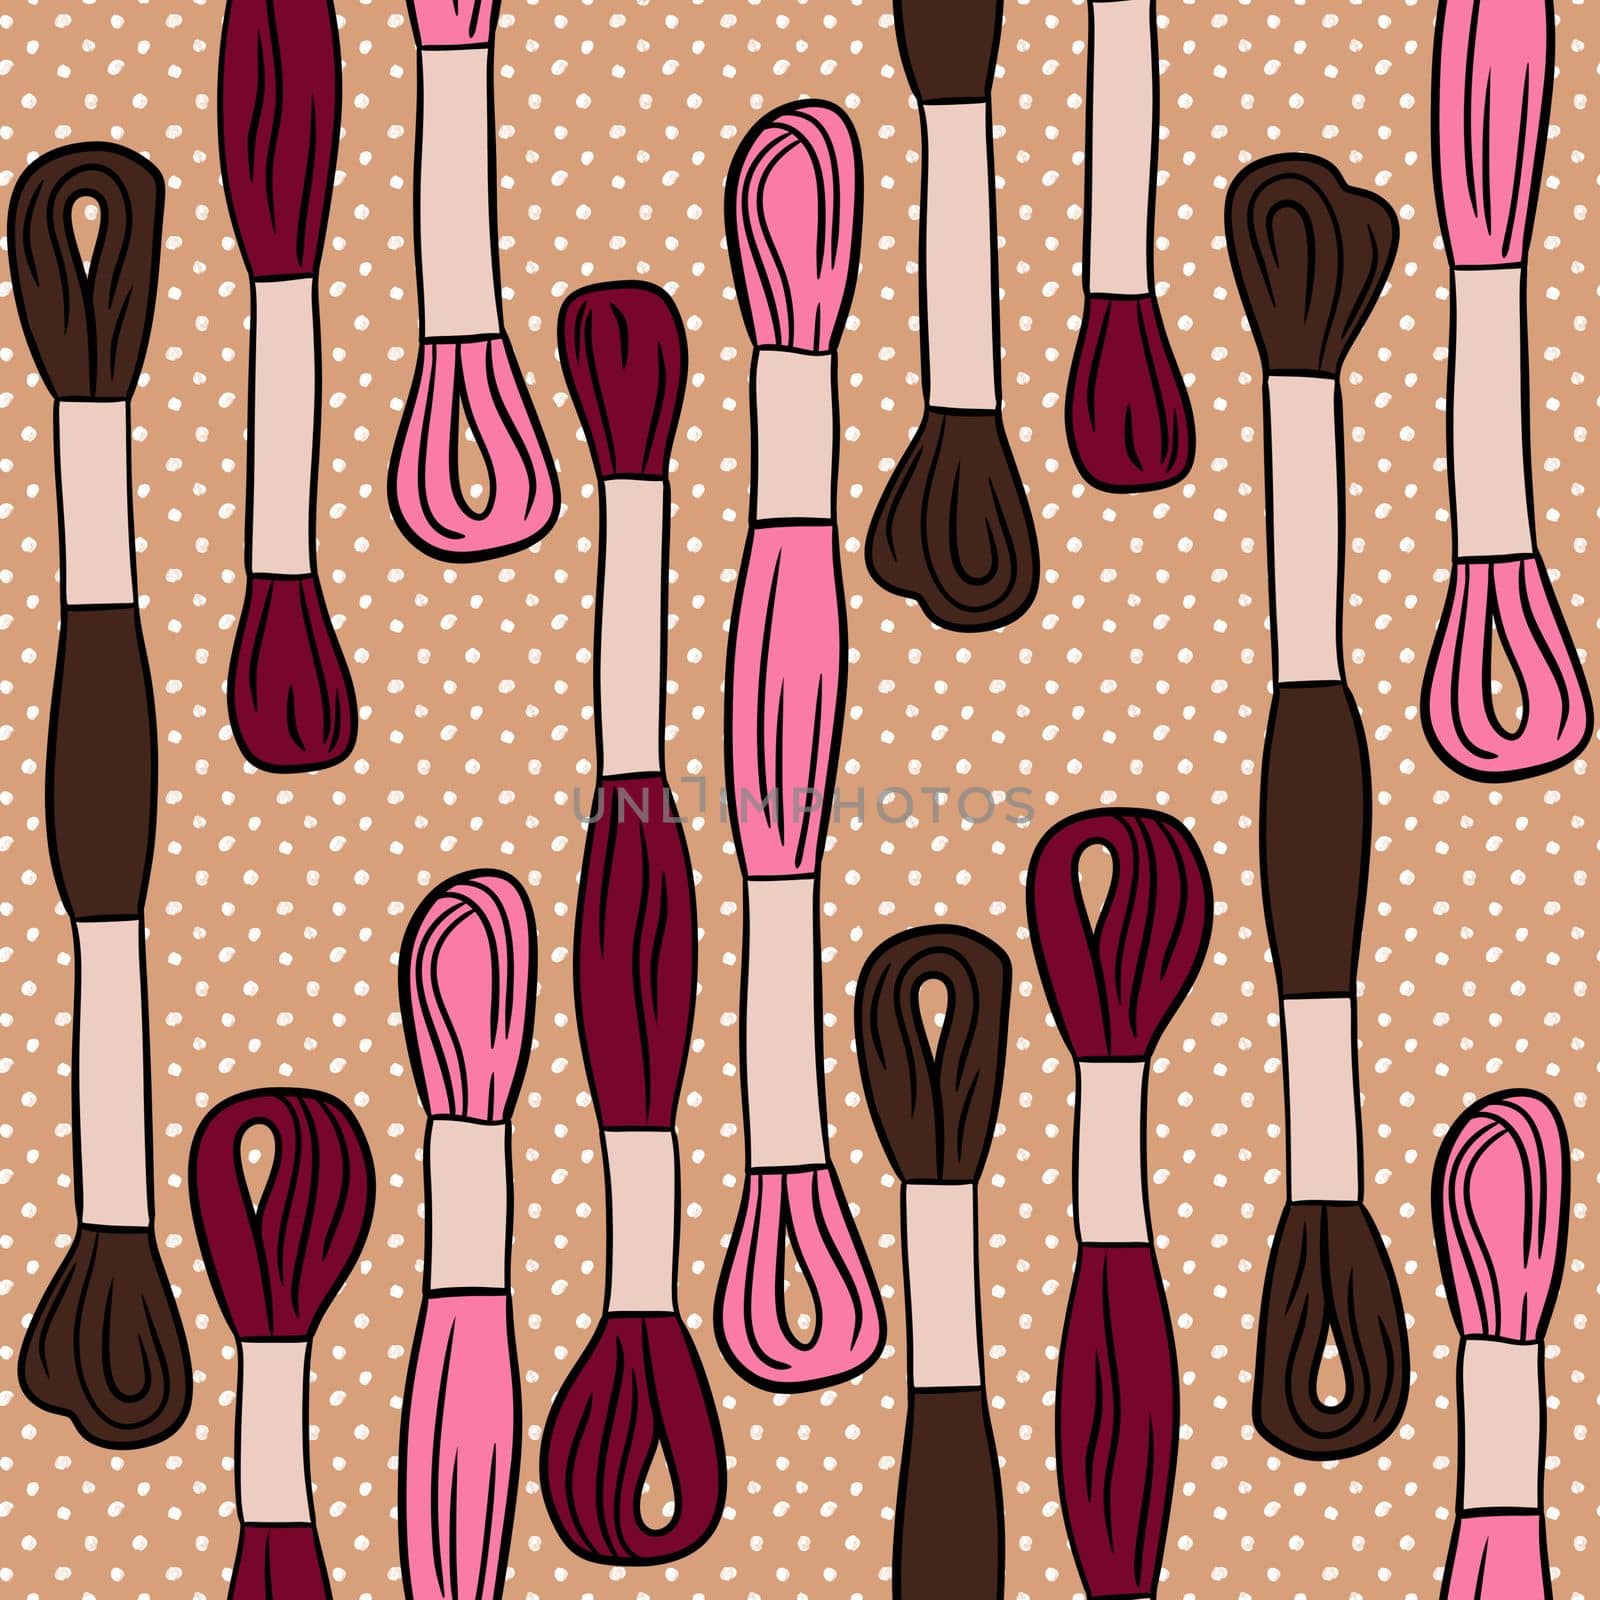 Hand drawn seamless pattern with moulinet embroidery sewing crafts dressmaking items. Pink brown beige polka dot background, tailor cute sew print, handmade needwork business hobby, fabric handcraft design. by Lagmar